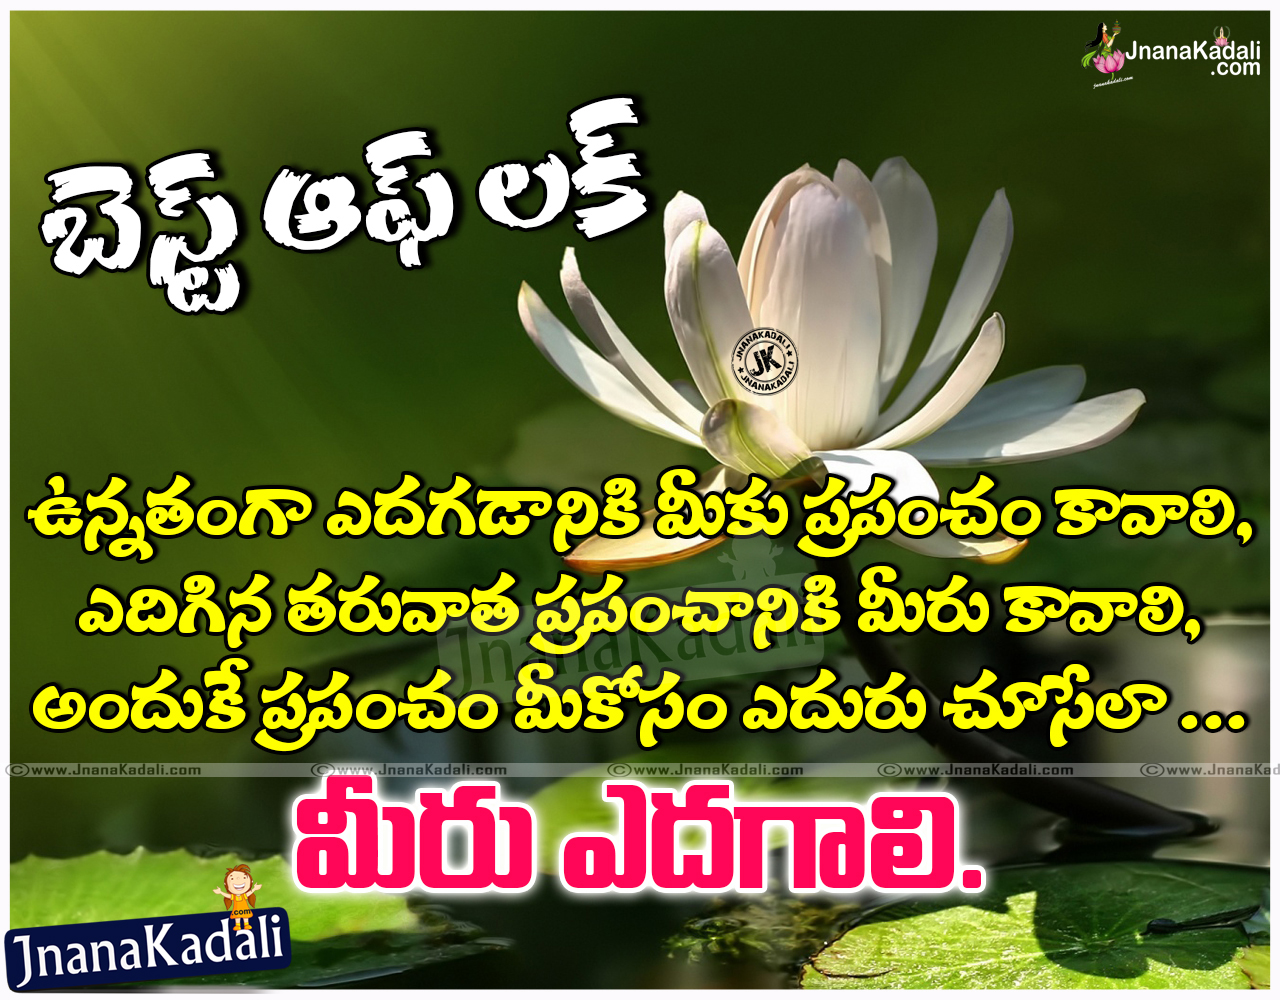 All the best for success inspiring quotes with best images in Telugu ALL THE BEST